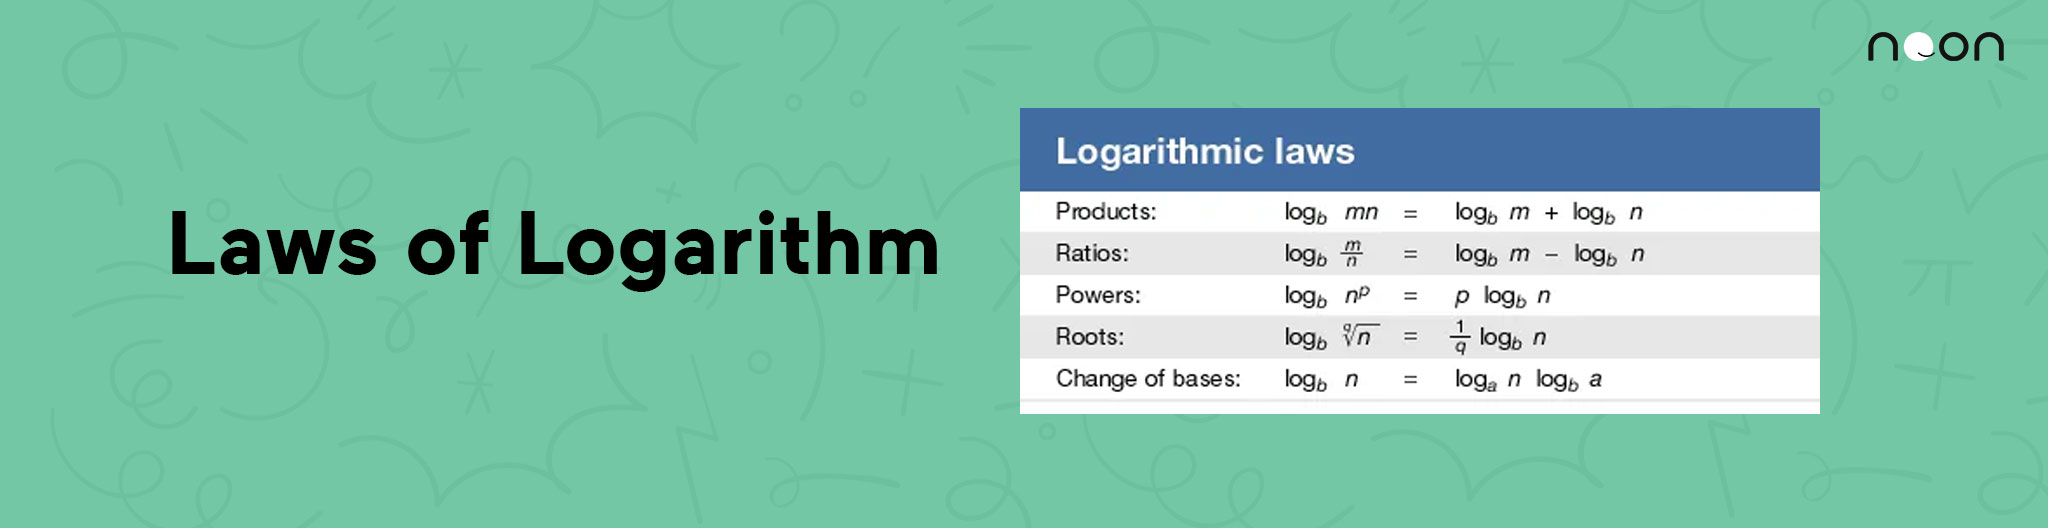 Law of Logarithm